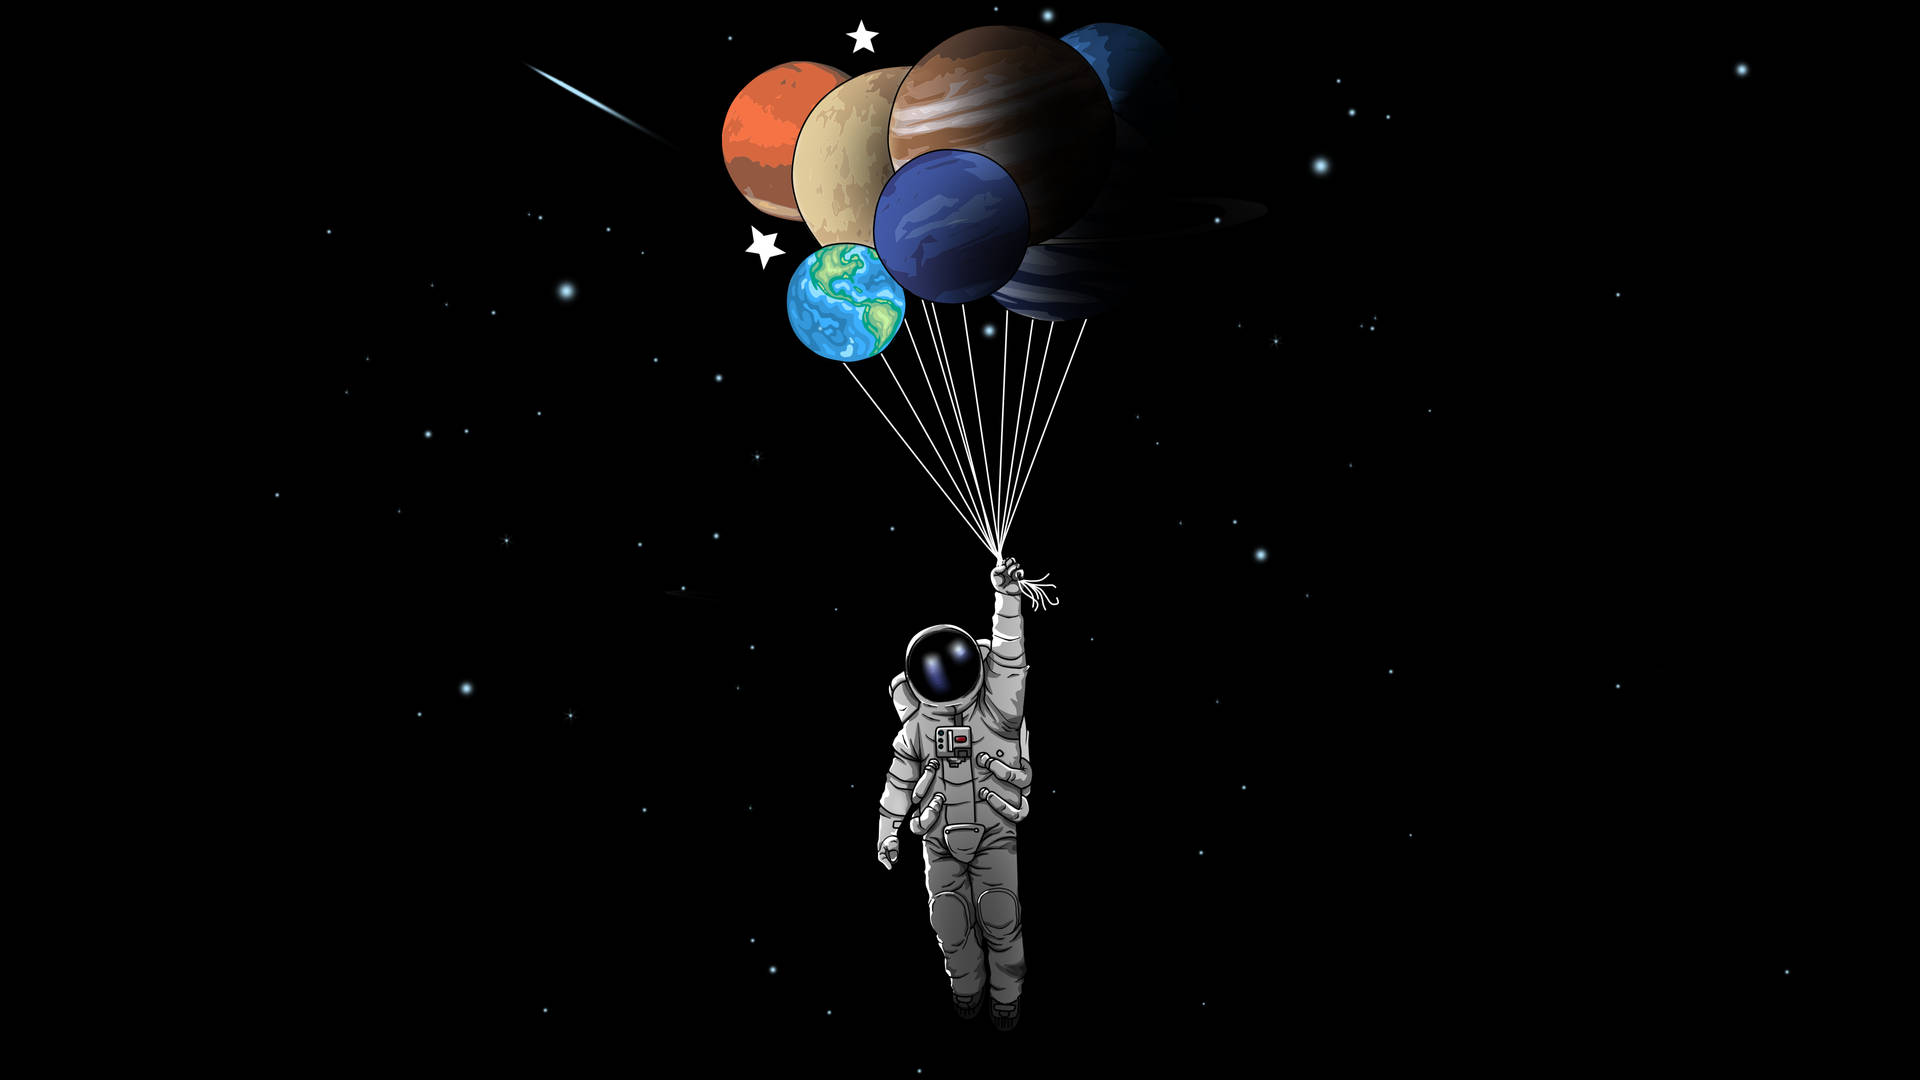 4k Astronaut With Planet Balloons Wallpaper